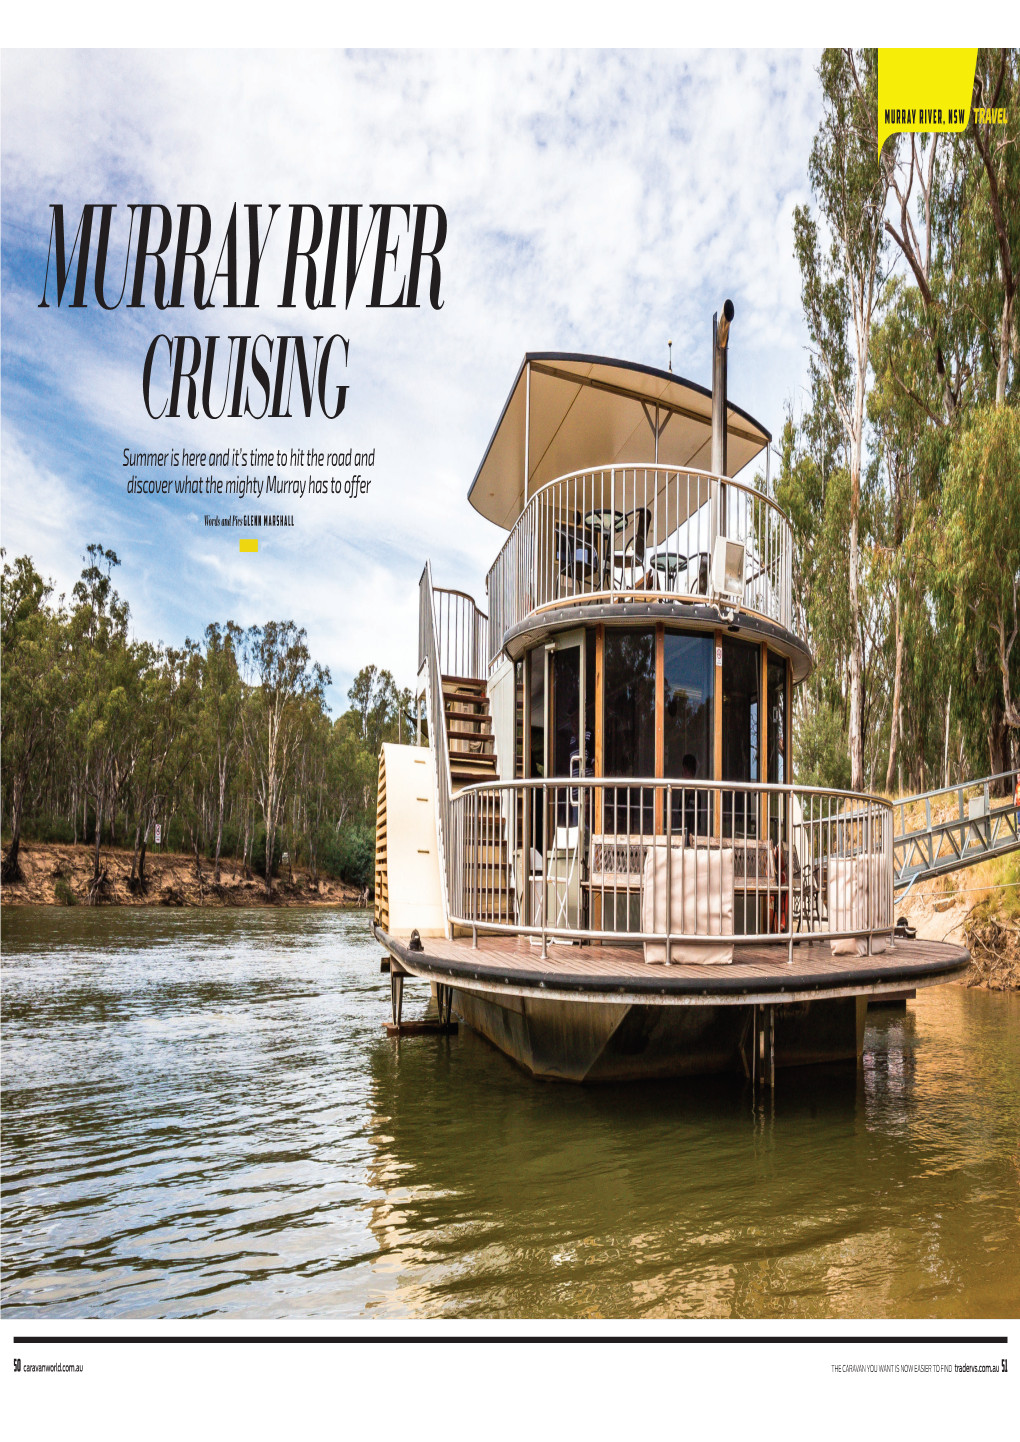 MURRAY RIVER CRUISING Summer Is Here and It’S Time to Hit the Road and Discover What the Mighty Murray Has to Offer